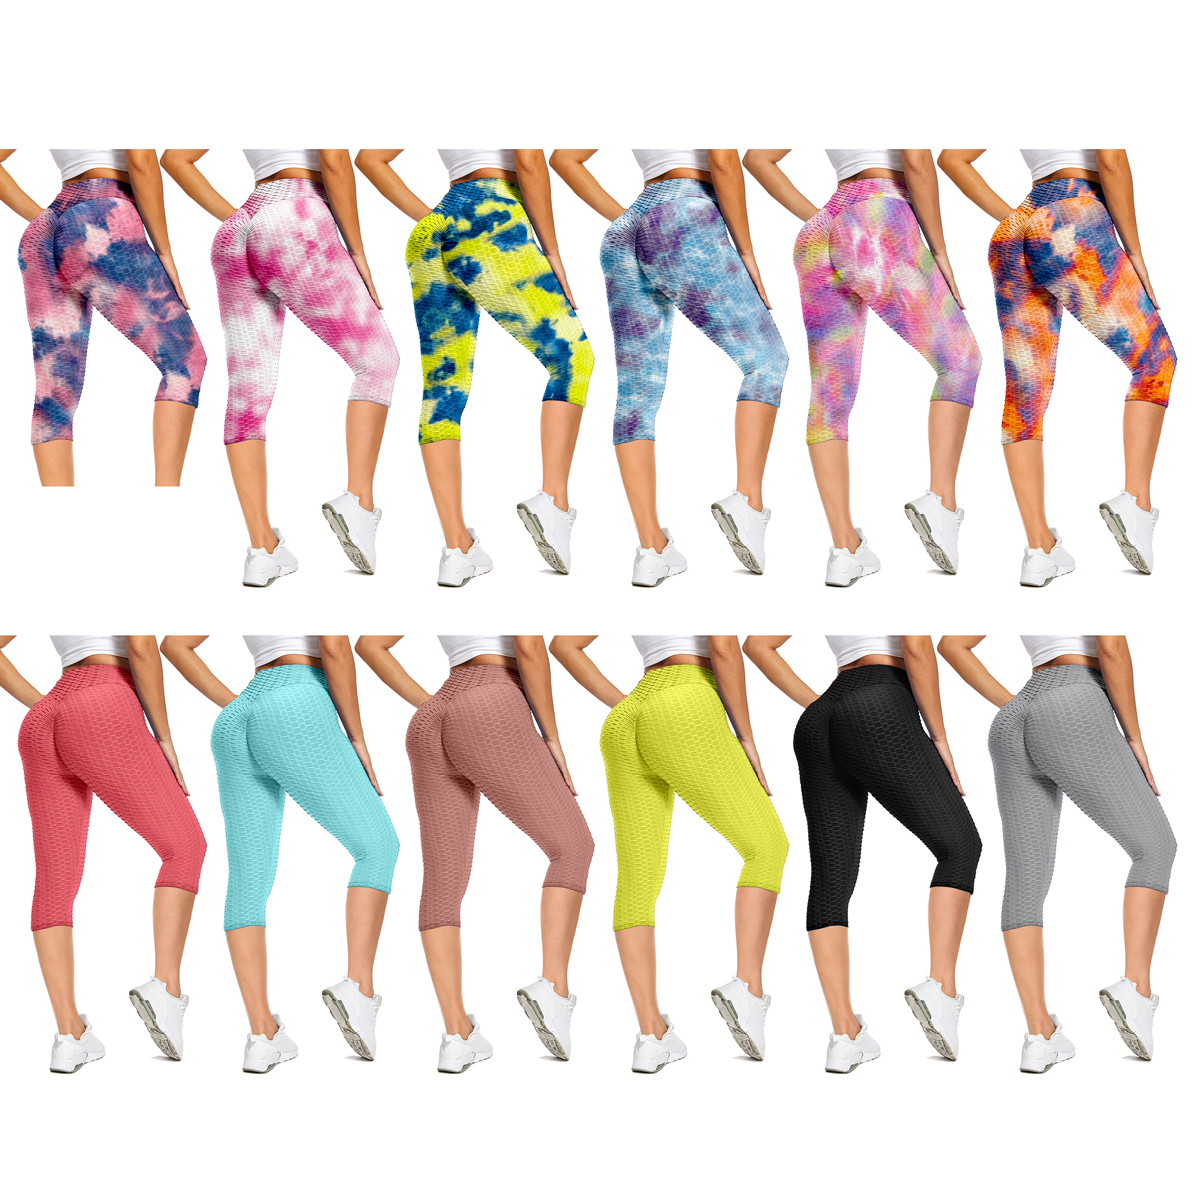 3-Pack: Women's High Waisted Anti Cellulite Leggings (Butt Lifting) - Solids, Large/X-Large